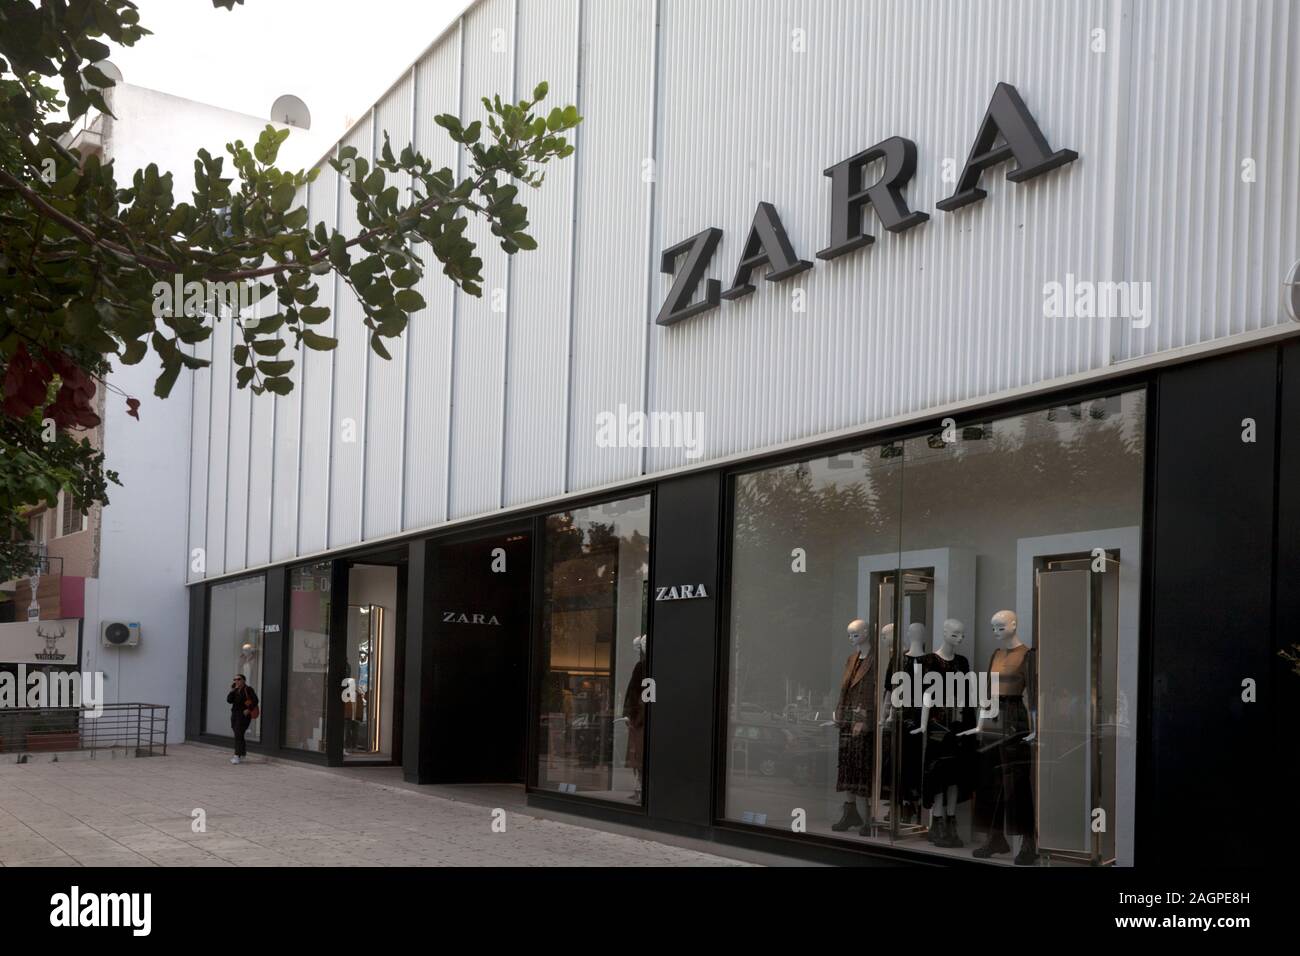 Page 2 - Zara Shop High Resolution Stock Photography and Images - Alamy